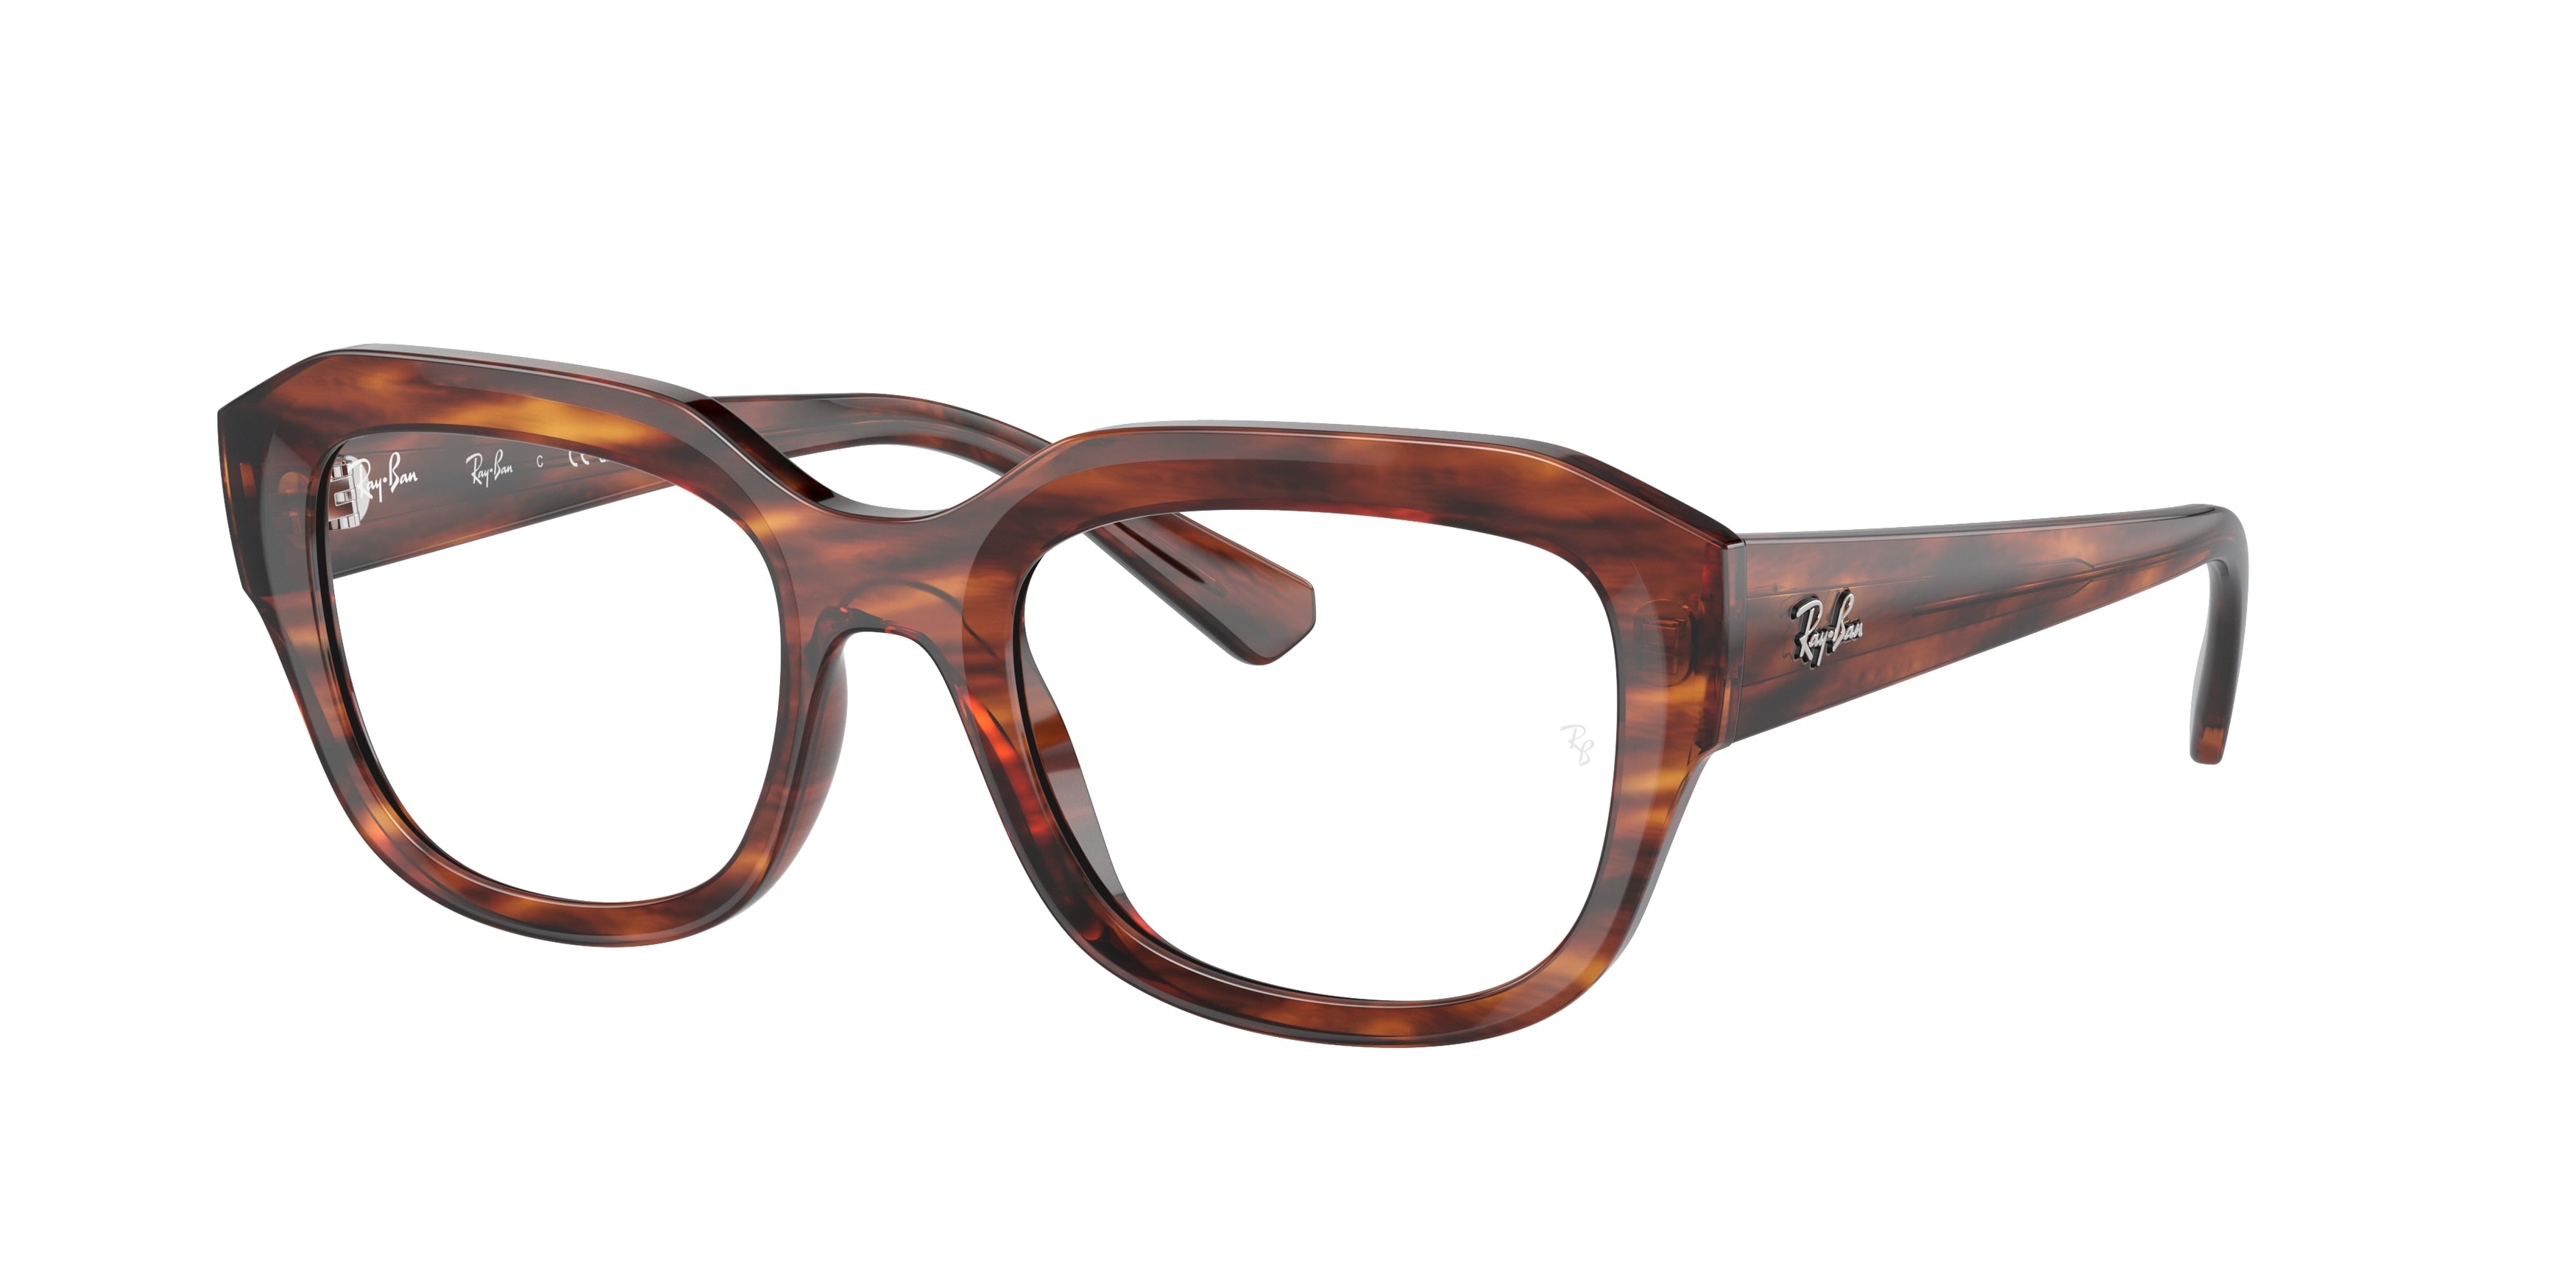 Ray-Ban Optical LEONID RX7225 Square Eyeglasses  8315-Striped Havana 54-145-20 - Color Map Brown